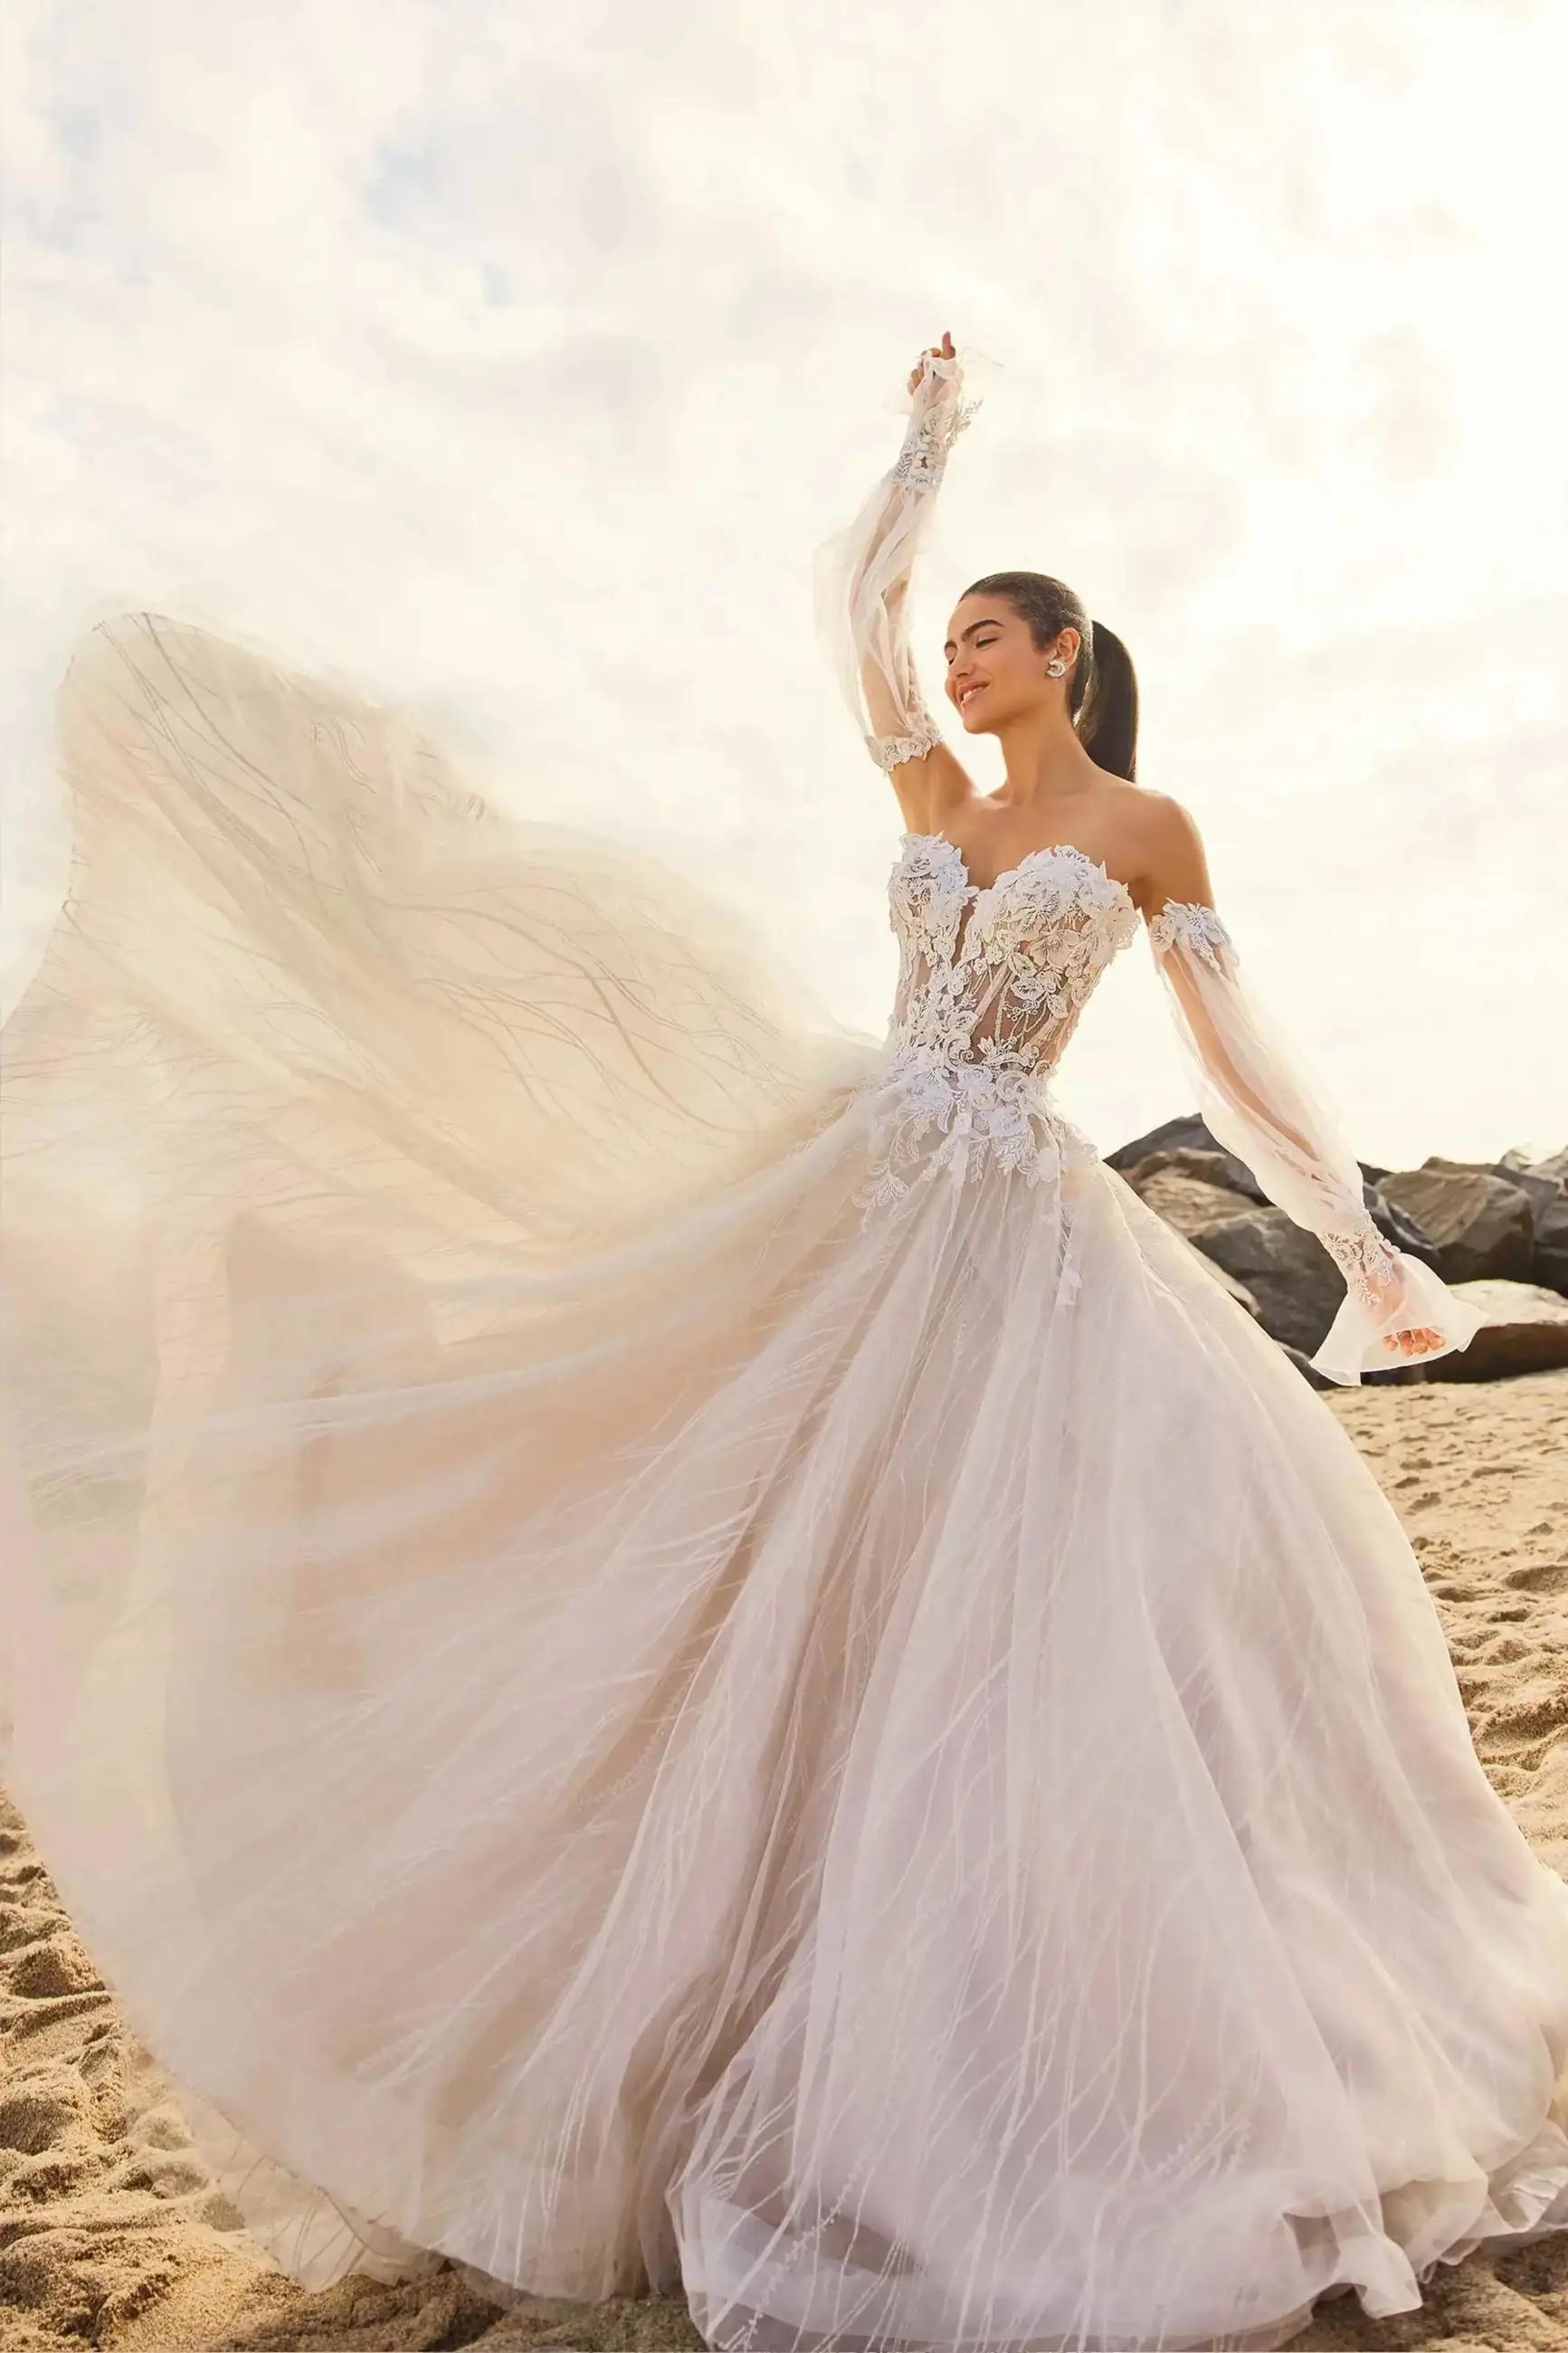 Most Swoon-Worthy Bridal Styles in Spring 2023 Image